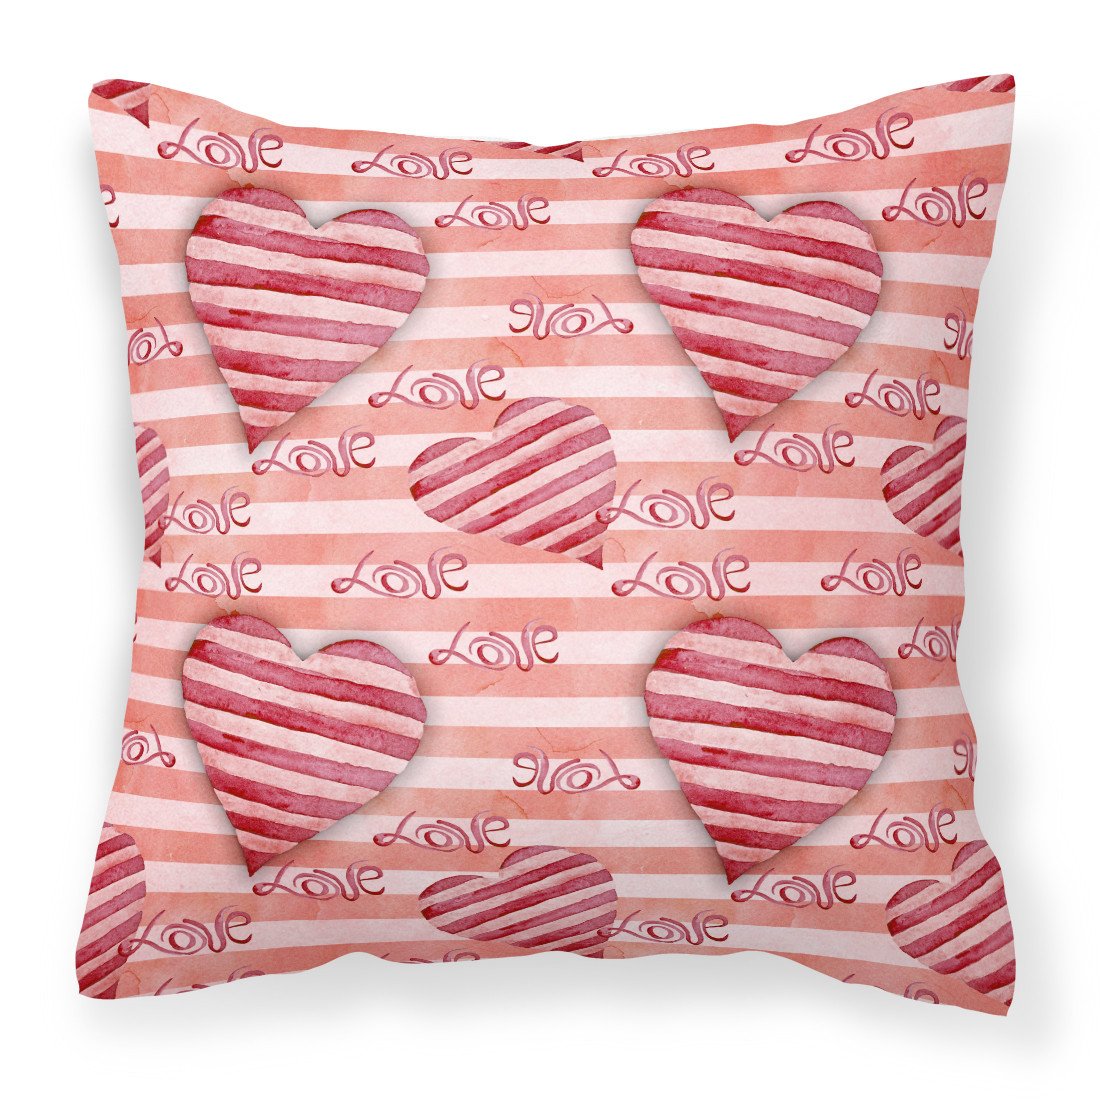 Watercolor Red Striped Hearts Fabric Decorative Pillow BB7567PW1818 by Caroline's Treasures